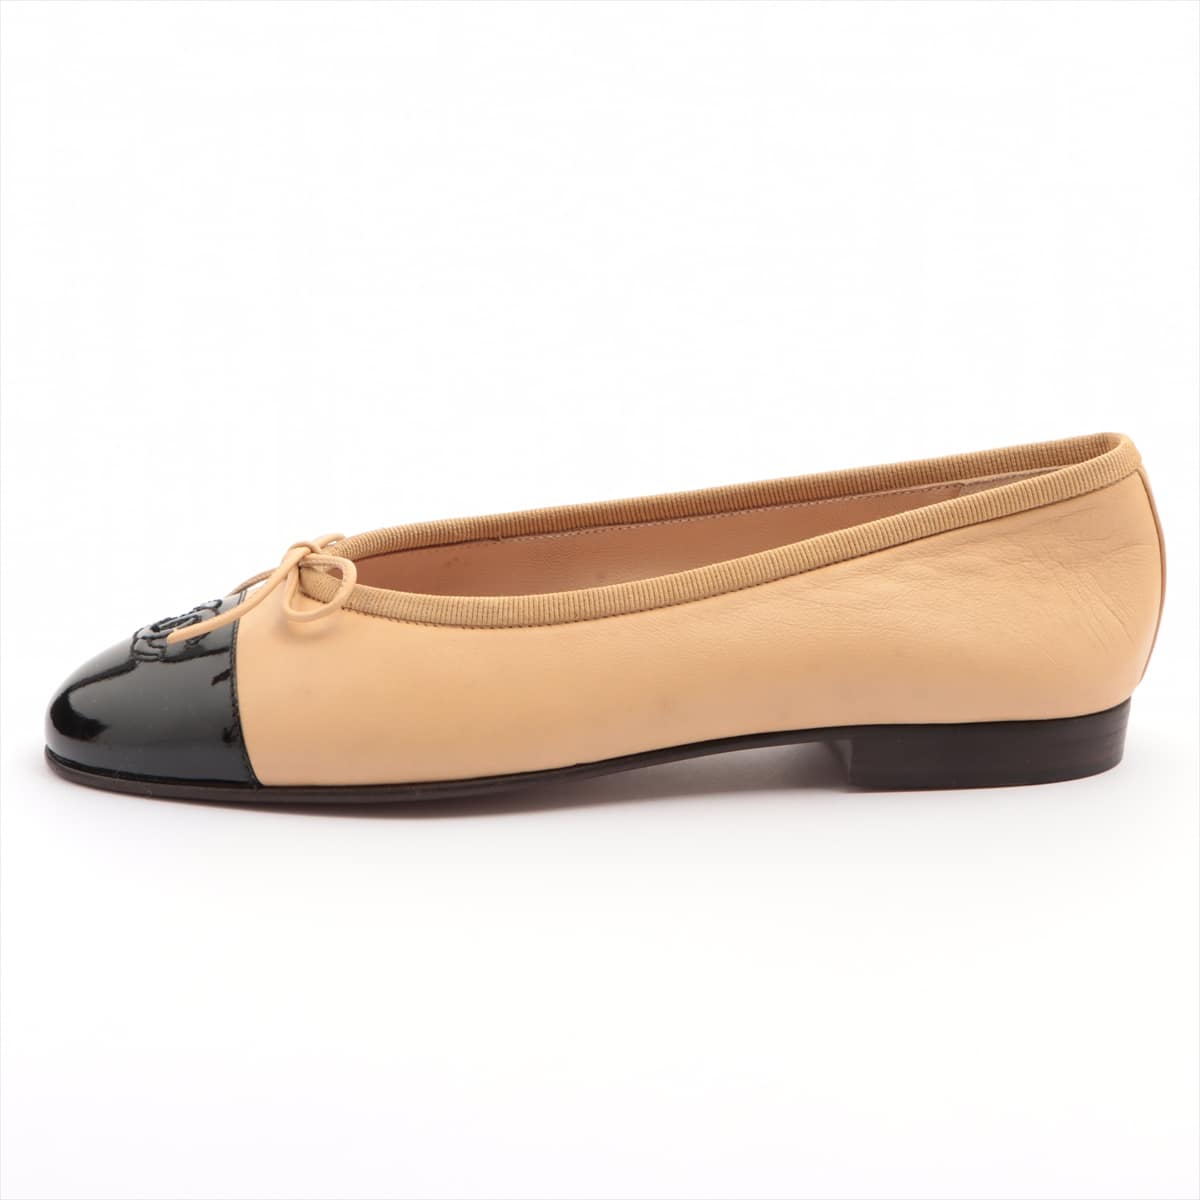 Chanel Coco Mark Leather Flat Pumps 35.5 Ladies' Beige